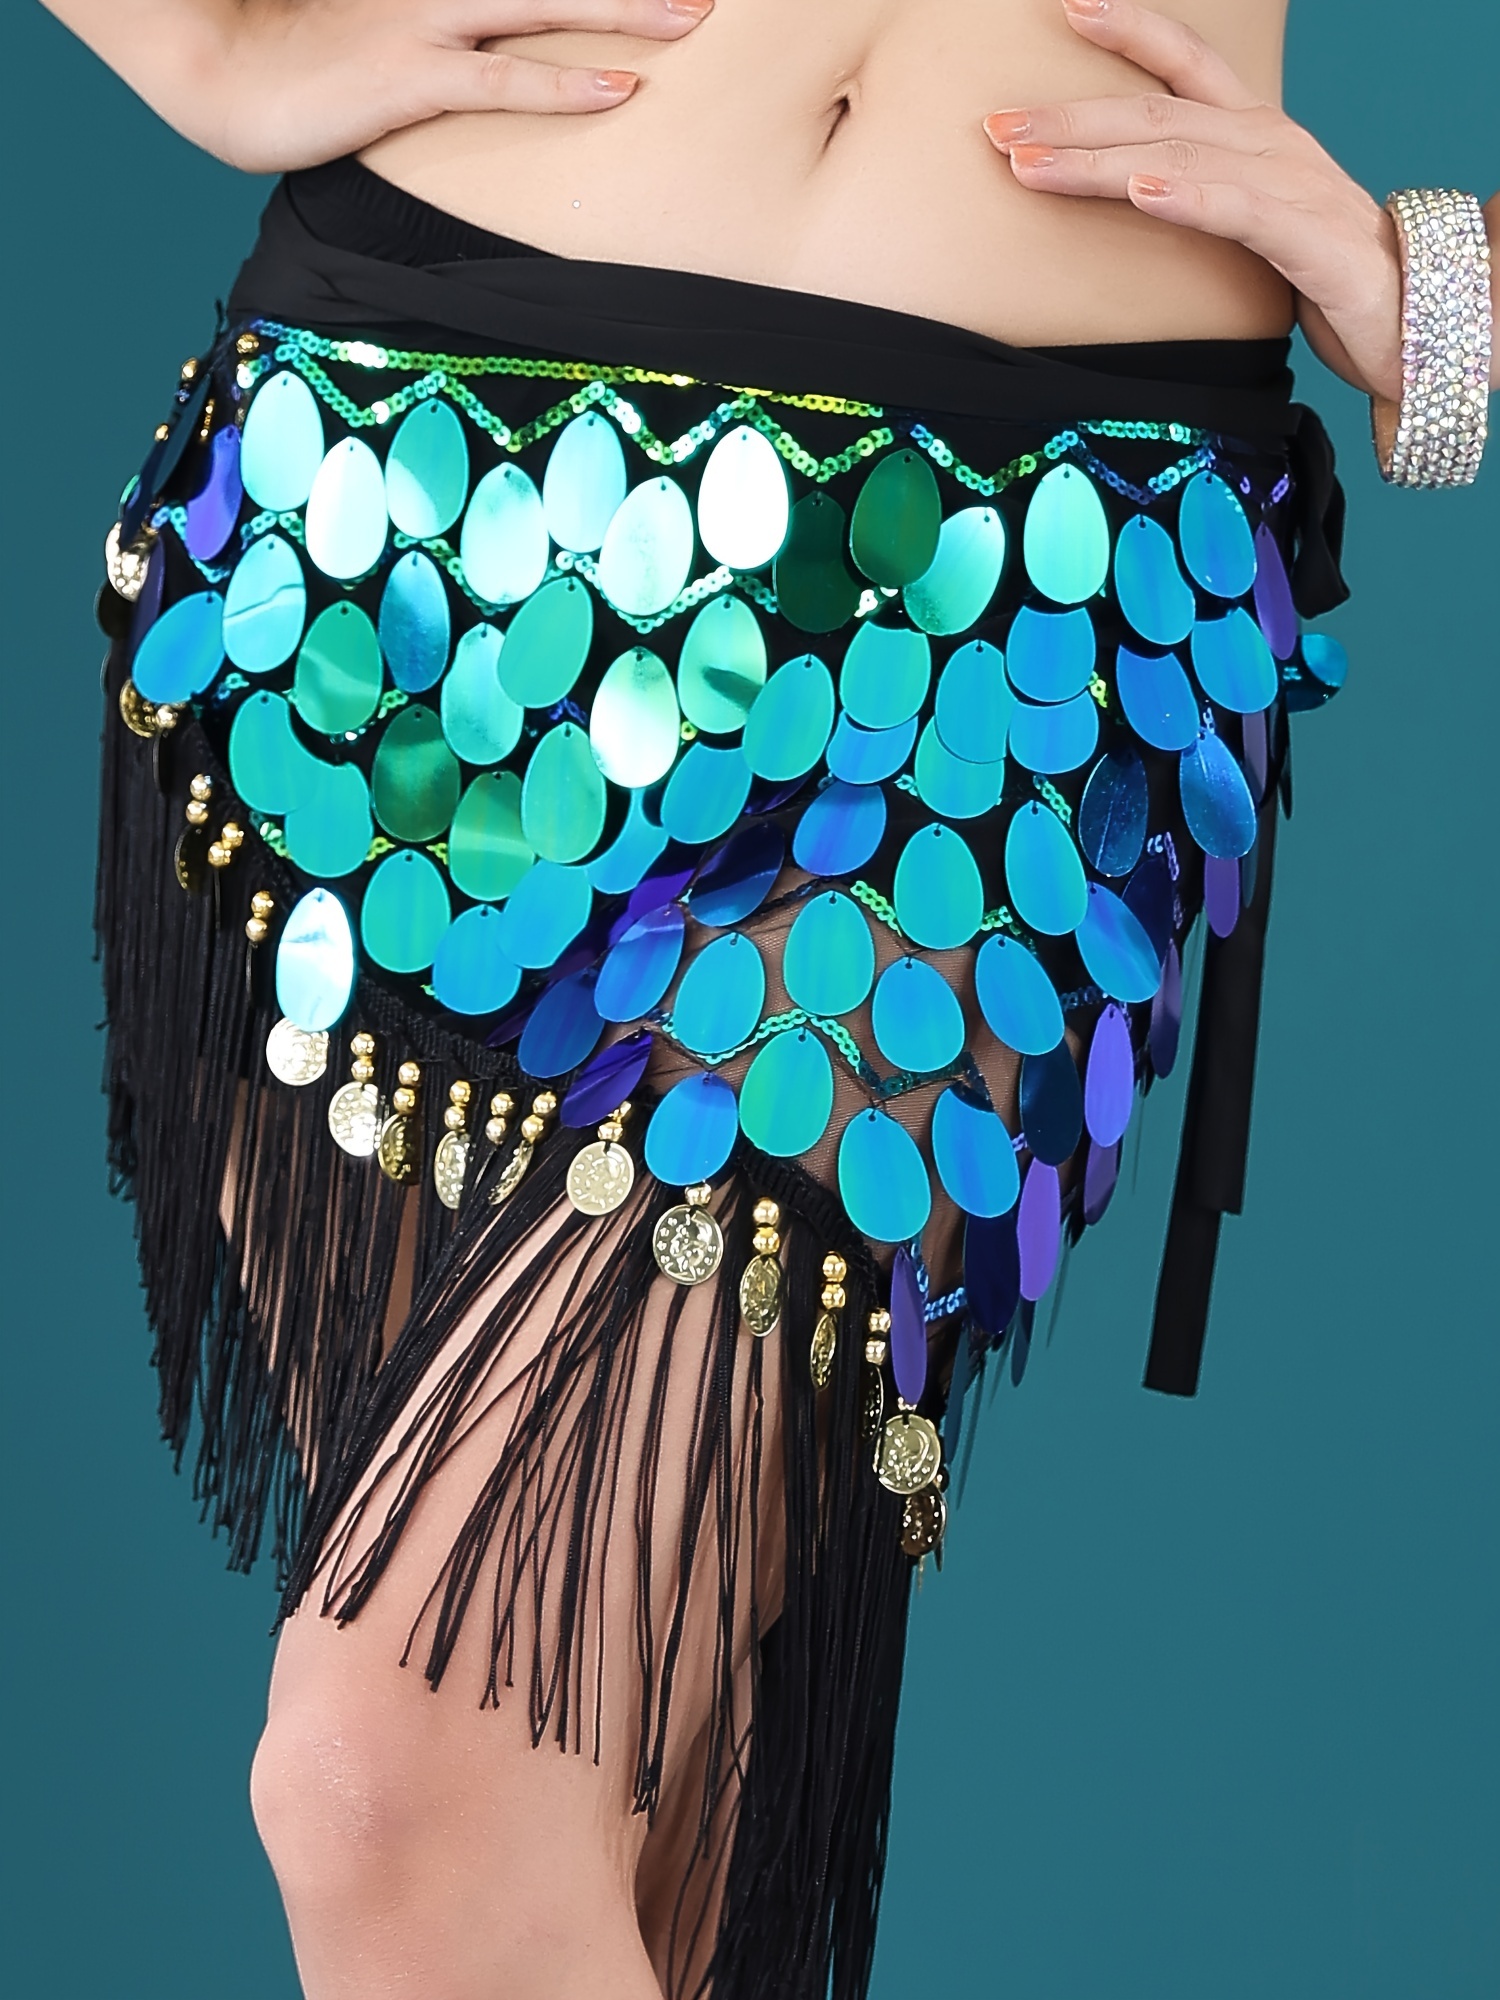 Tribal Fusion Belly Dance Bra With Silver Coins and Afghani Jewelry Accents  shaped Hard Cup -  Canada